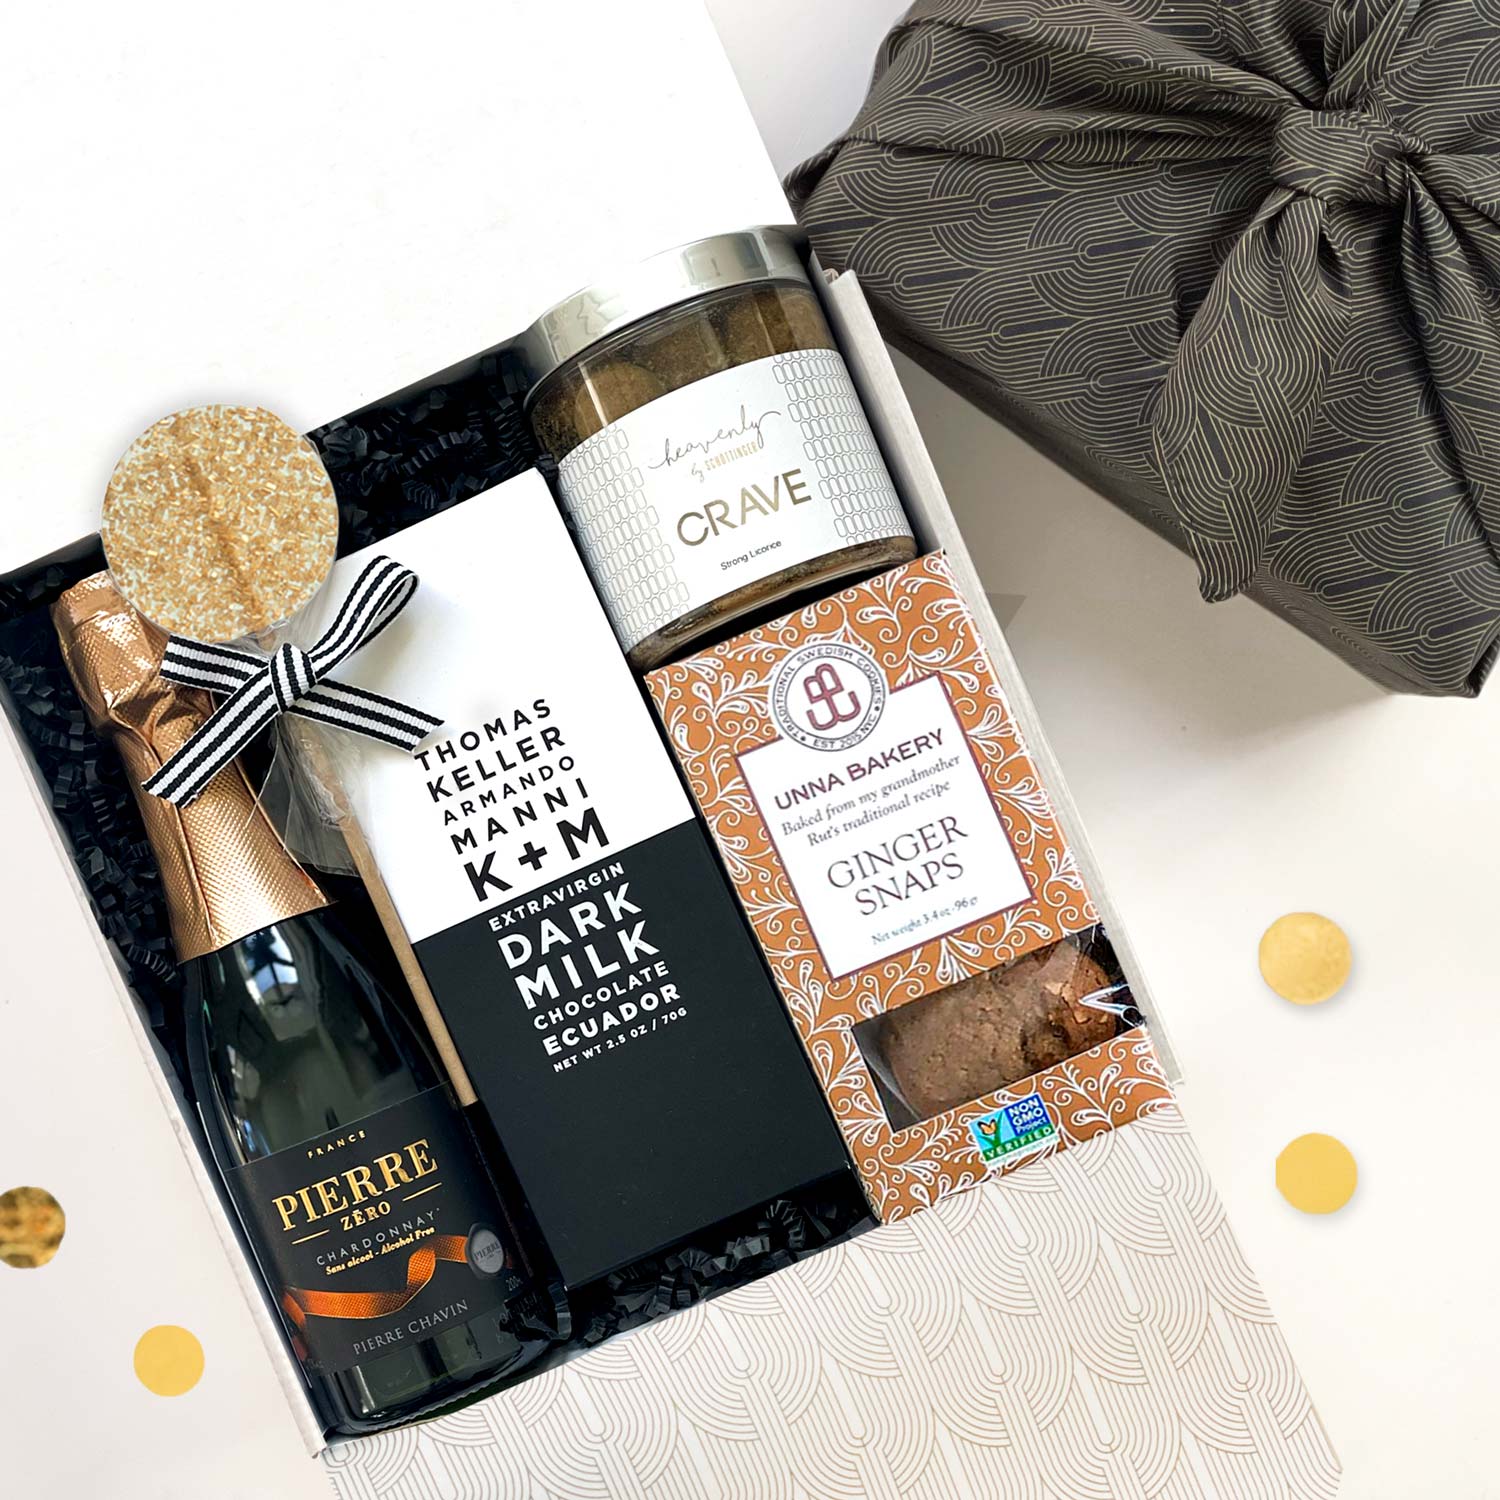 kadoo celebration curated gift box. Included Pierre zero chardonnay, Thomas Keller chocolate, cookies, licorice and more